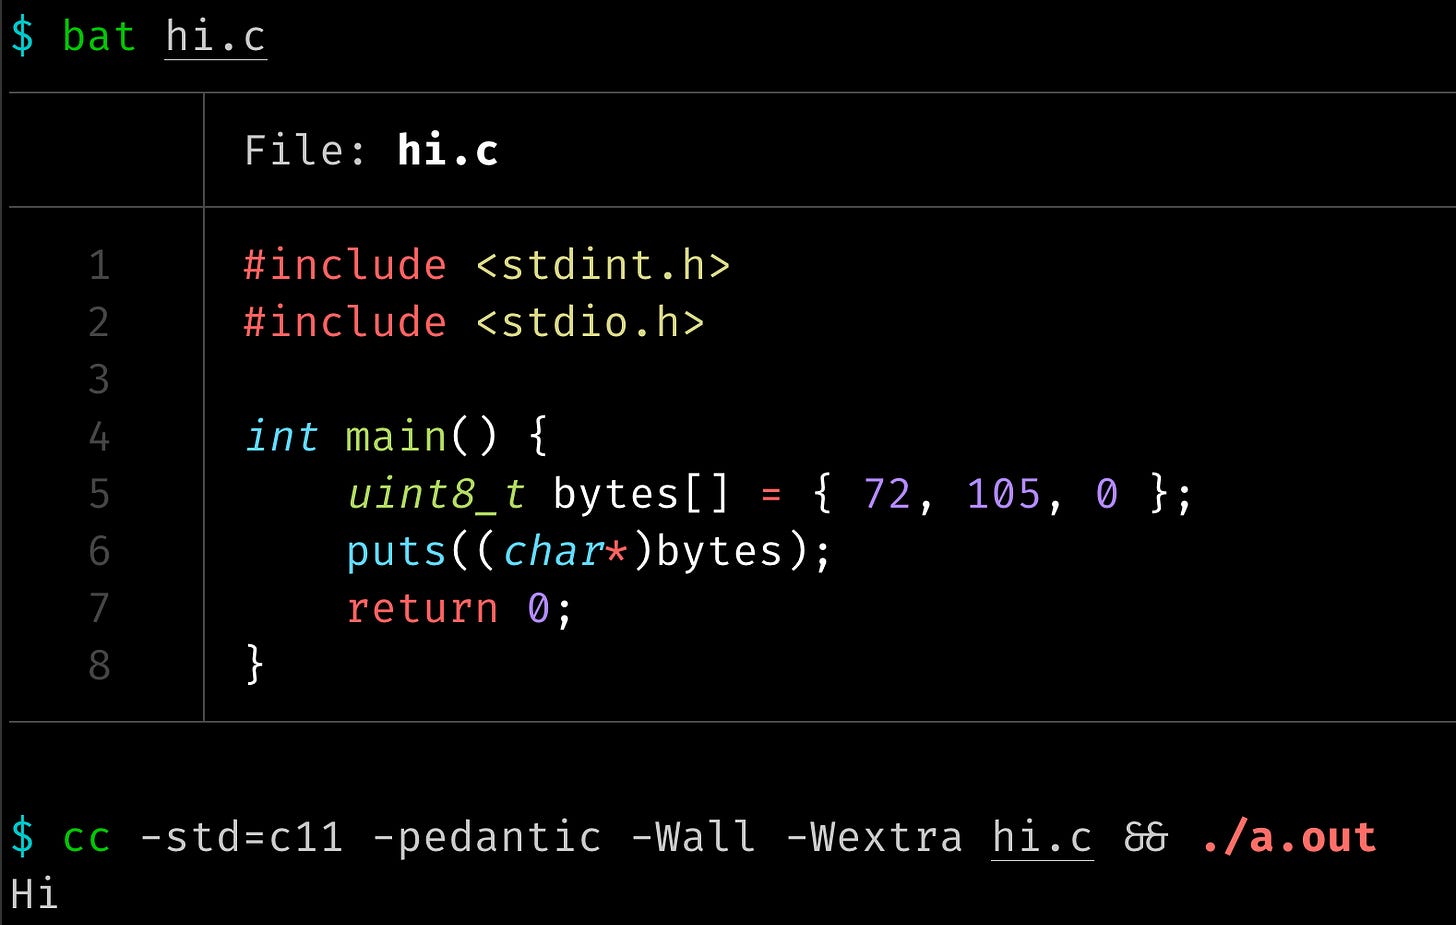 A C program that casts an array of bytes { 72, 105, 0 } to a string and prints it, followed by a command to compile and run the program.  The output of the program is shown as a single line containing only the word Hi.